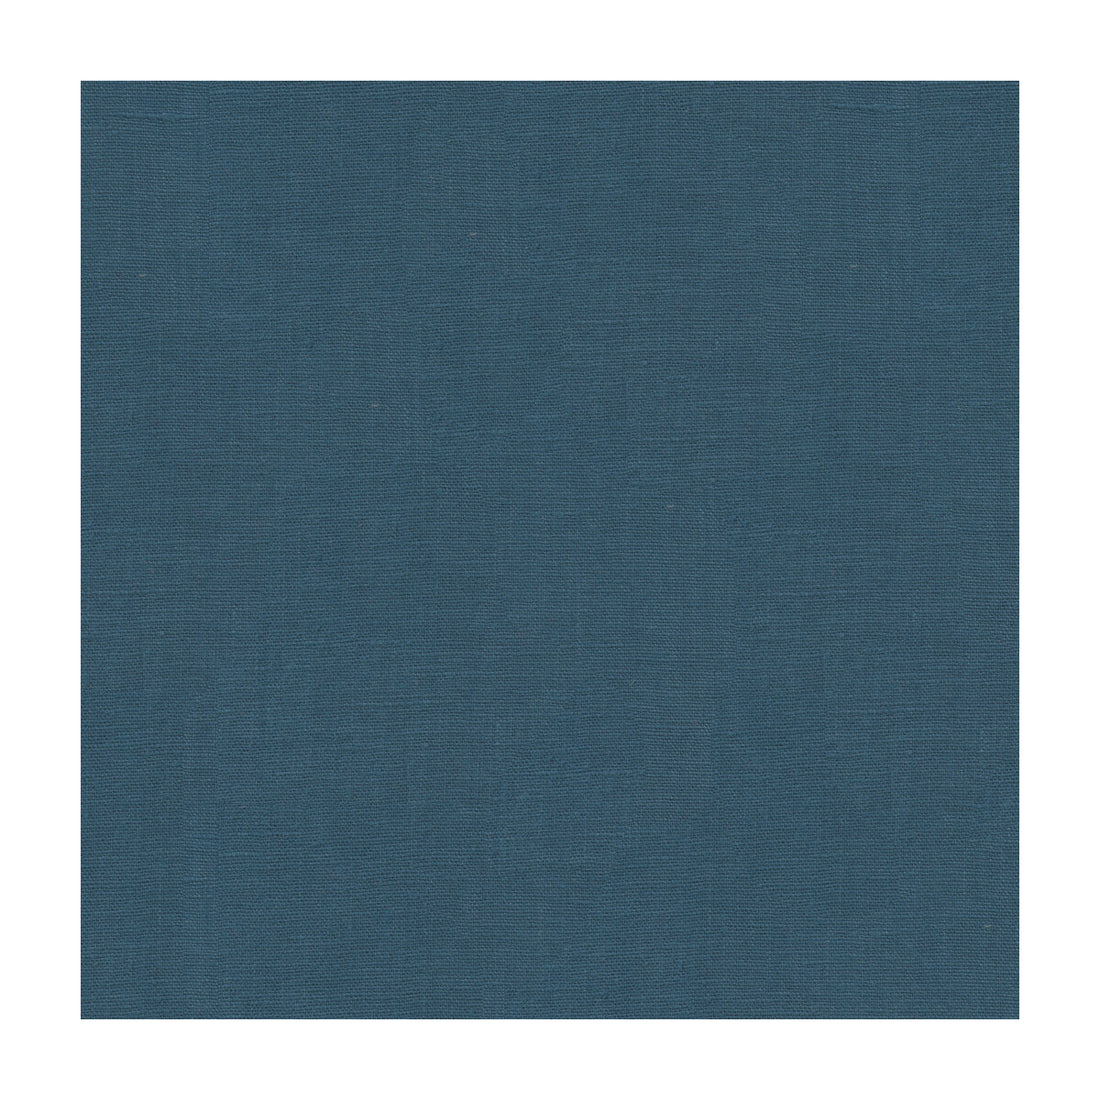 Dublin Linen fabric in denim color - pattern 2012175.5.0 - by Lee Jofa in the Colour Complements II collection